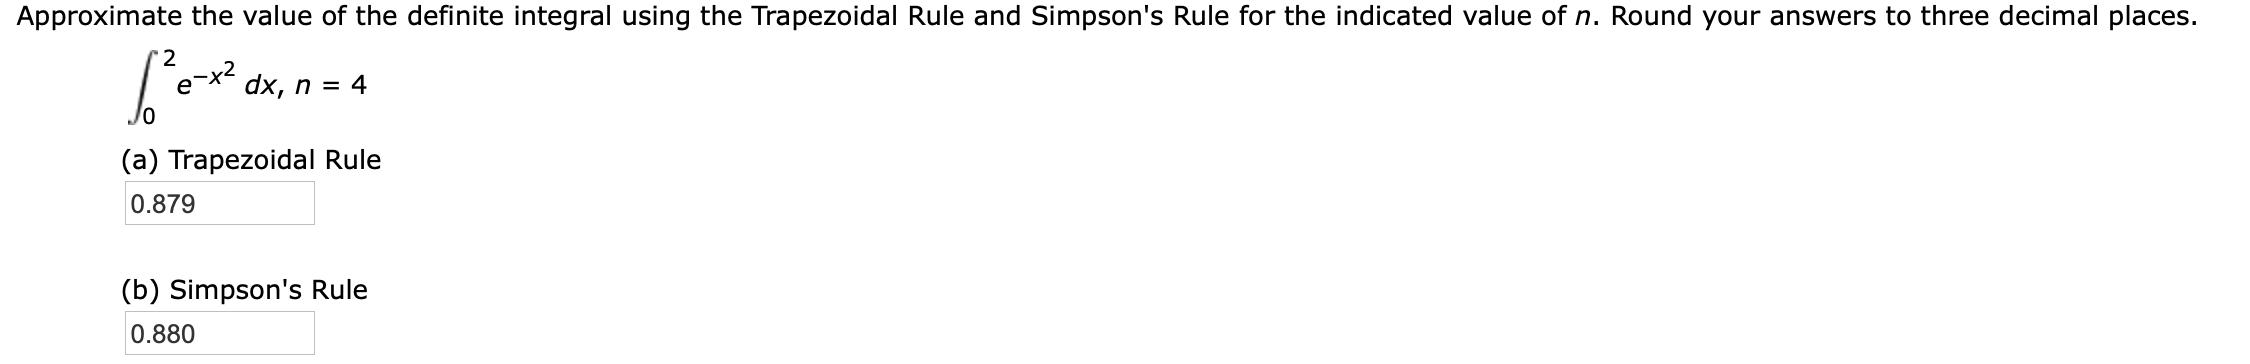 Approximate the value of the definite integral using the Trapezoidal Rule and Simpson's Rule for the indicated value of n. Round your answers to three decimal places.
dx, n = 4
(a) Trapezoidal Rule
0.879
(b) Simpson's Rule
0.880
